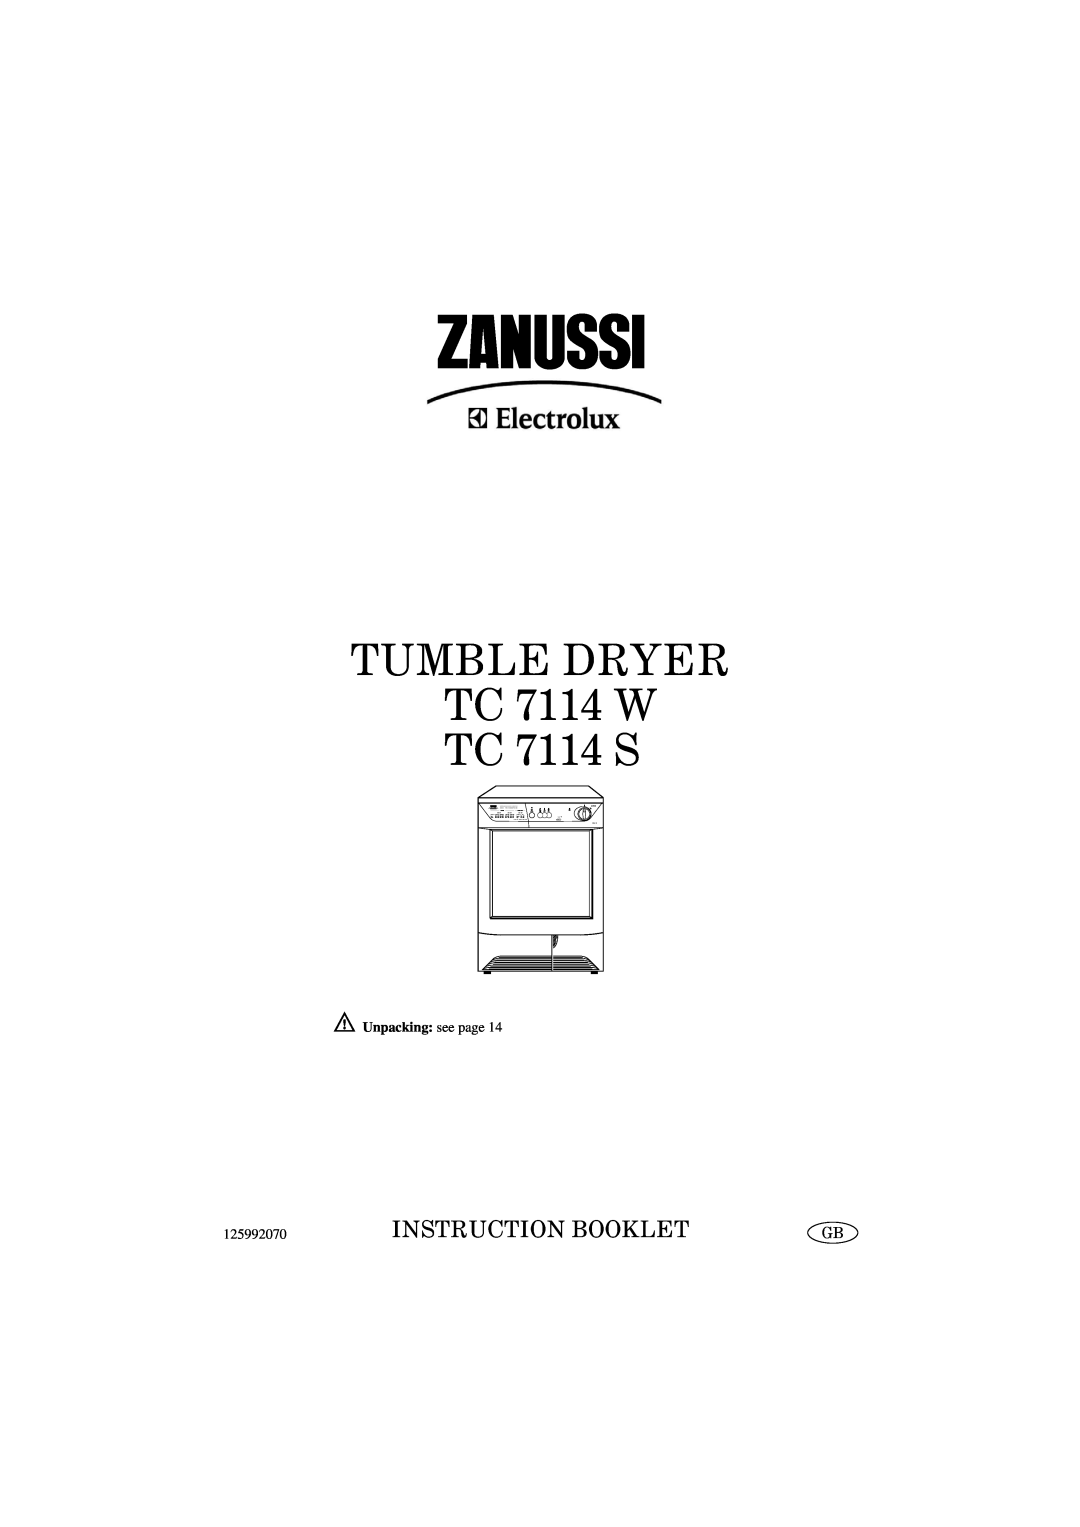 Zanussi manual TUMBLE DRYER TC 7114 W TC 7114 S, Instruction Booklet, Unpacking see page, Condenser Dryer 